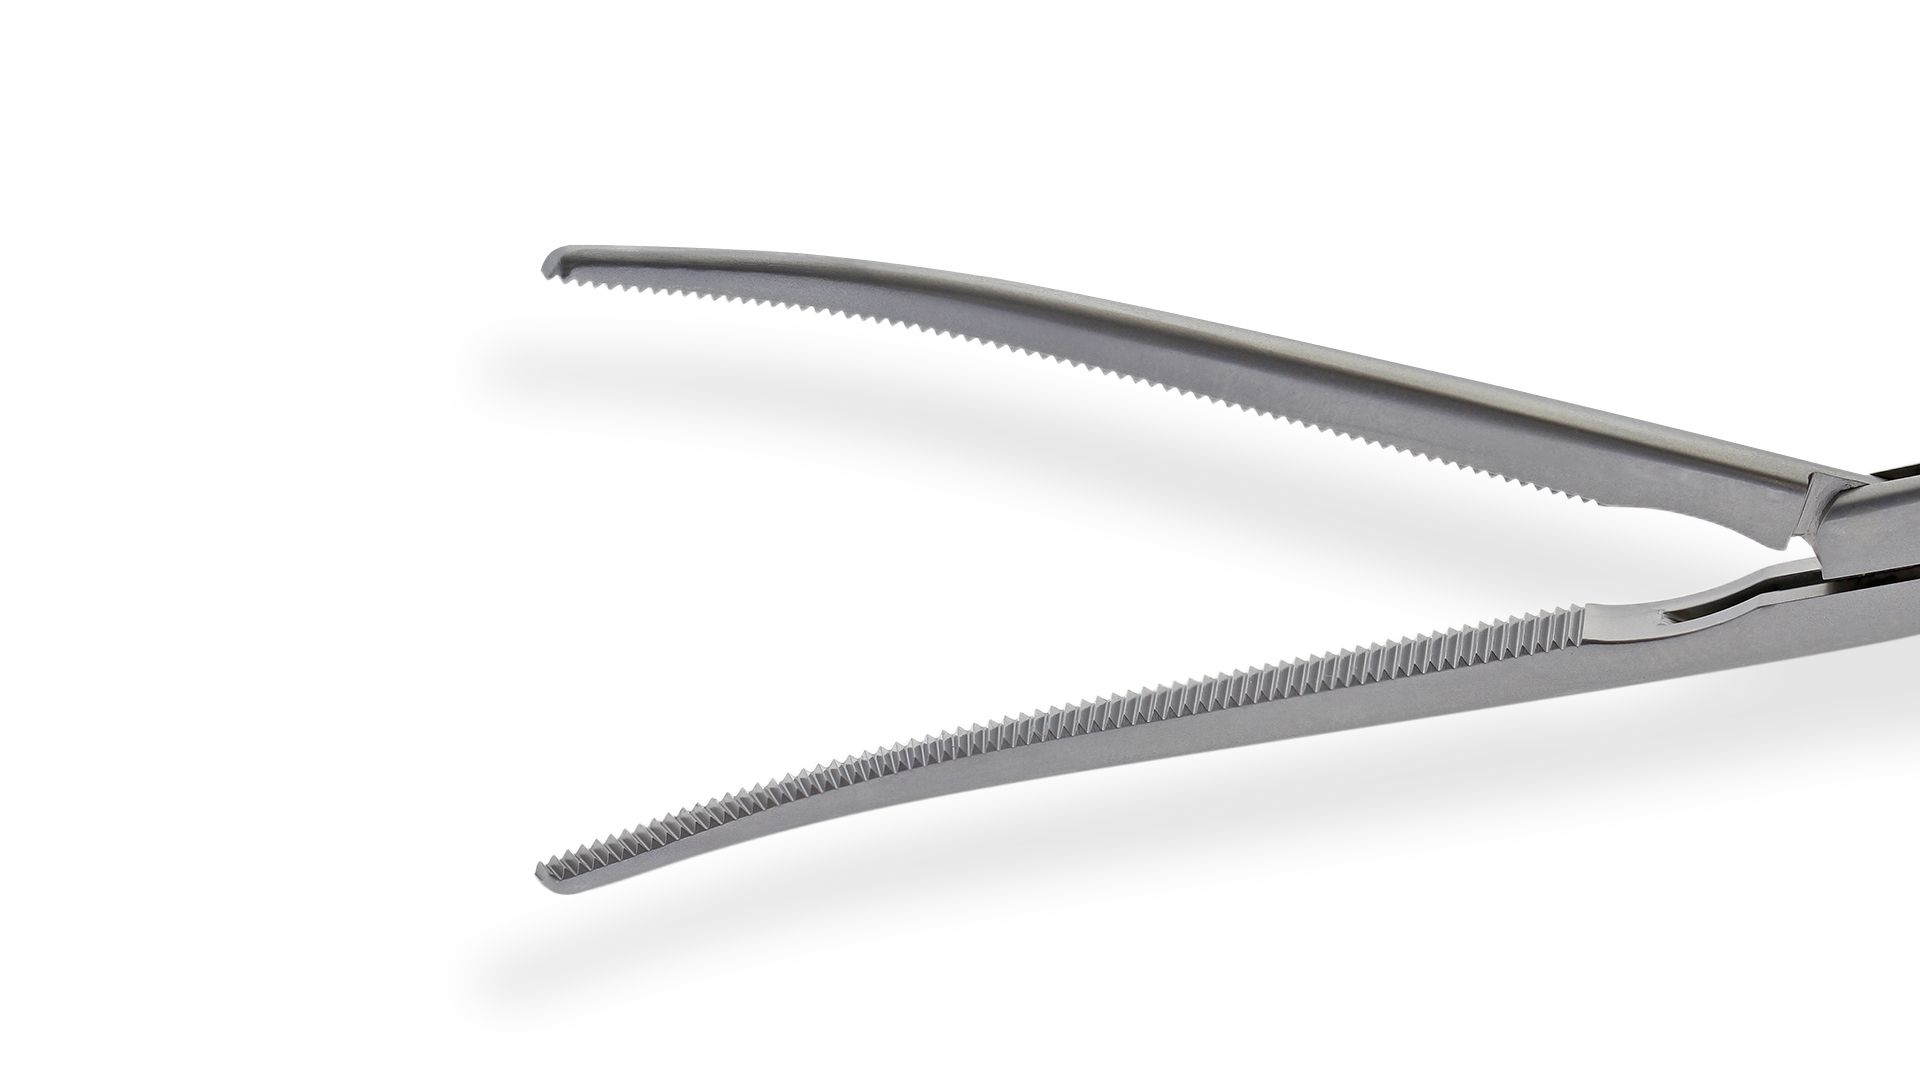 VATS Curved Dissector – Serrated jaws